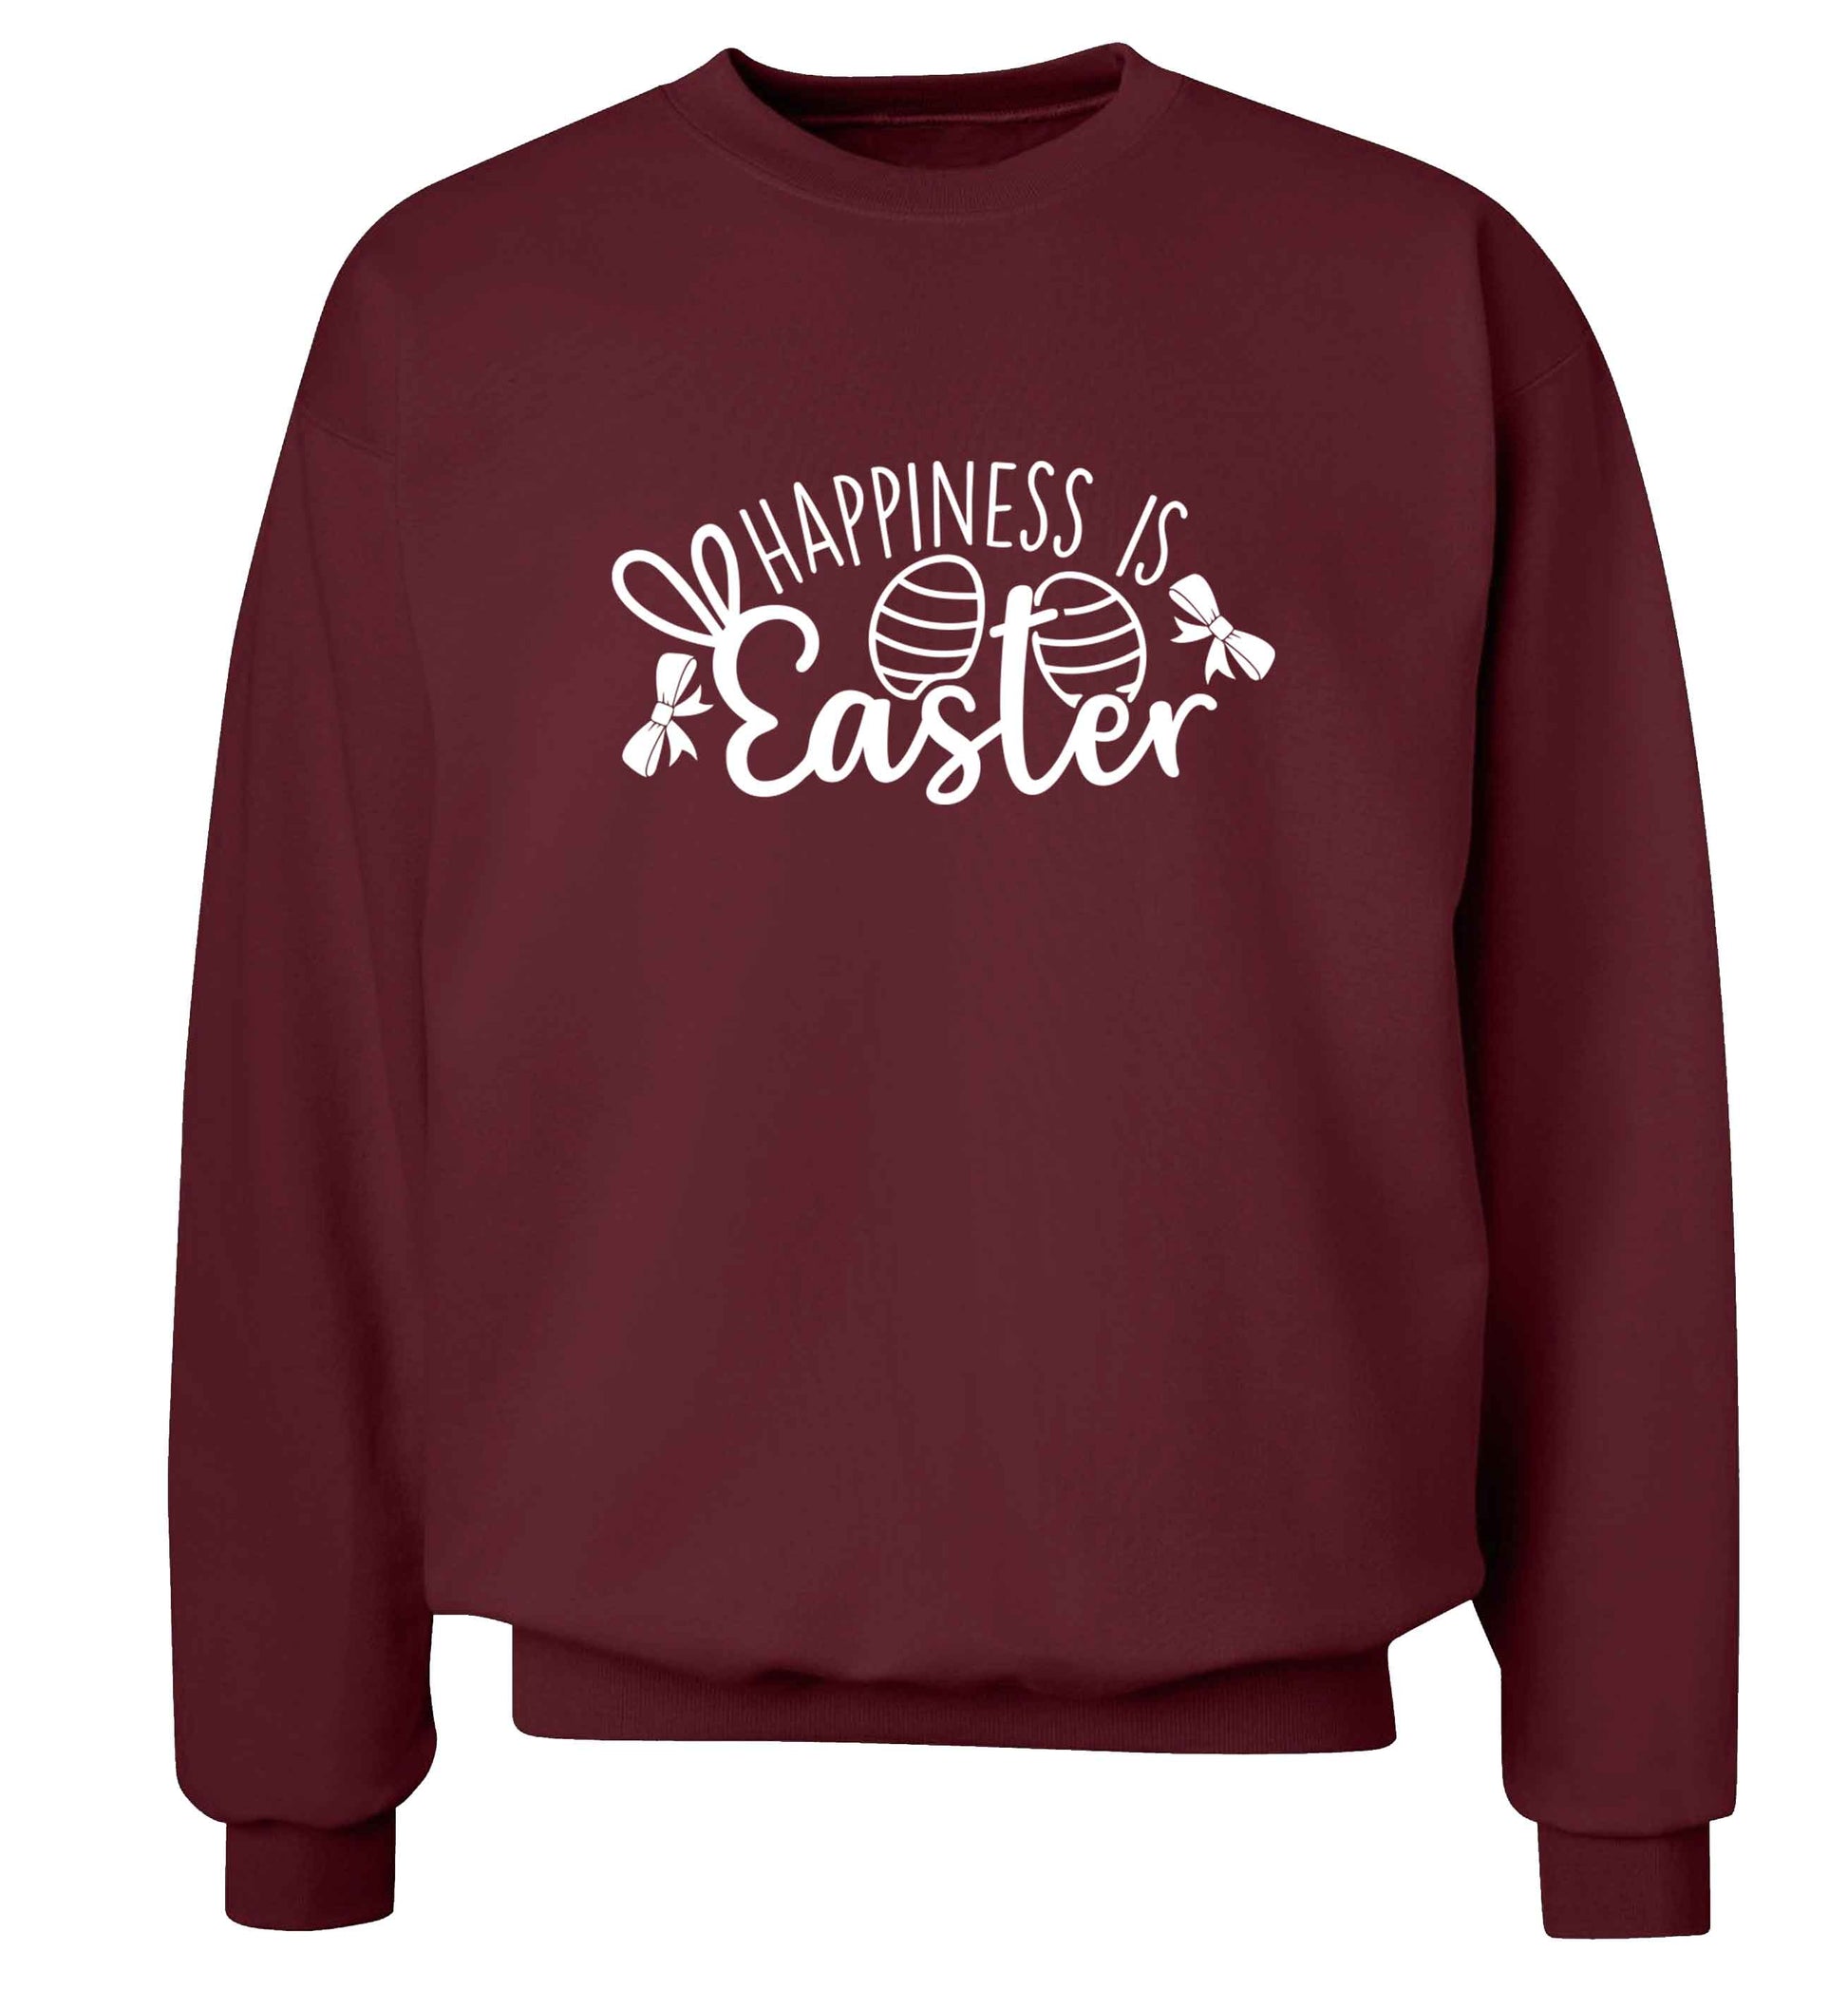 Happiness is easter adult's unisex maroon sweater 2XL